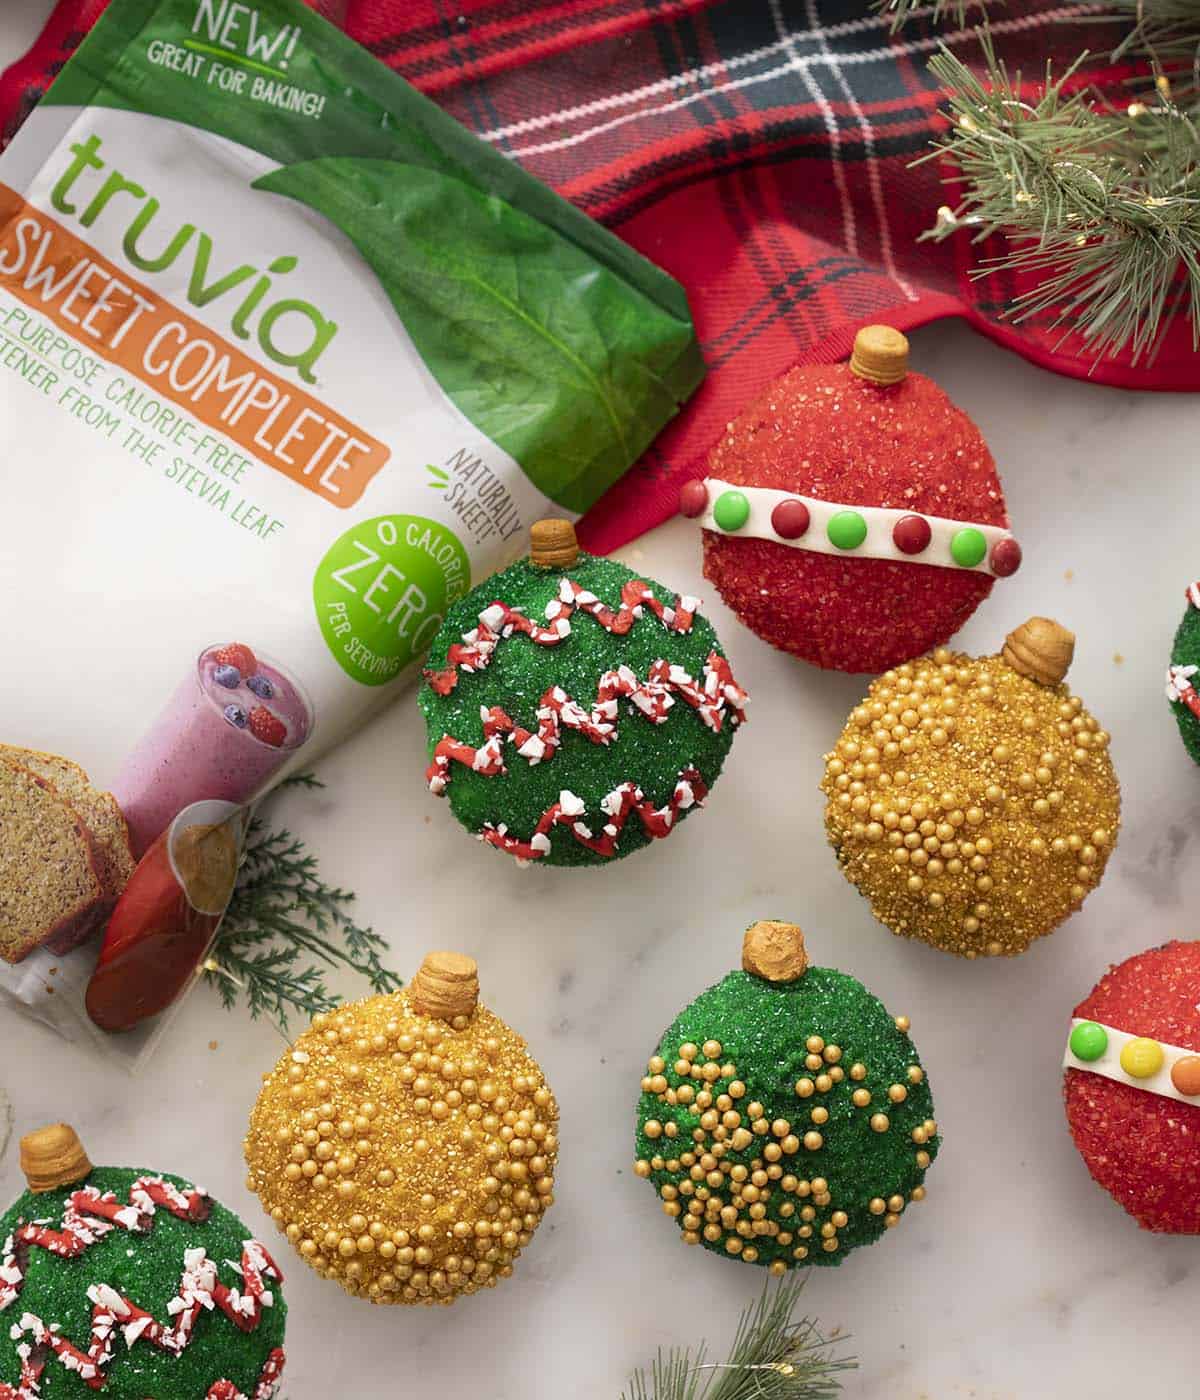 A bag of Truvia Sweet Complete next to some cupcakes decorated as Christmas ornaments.